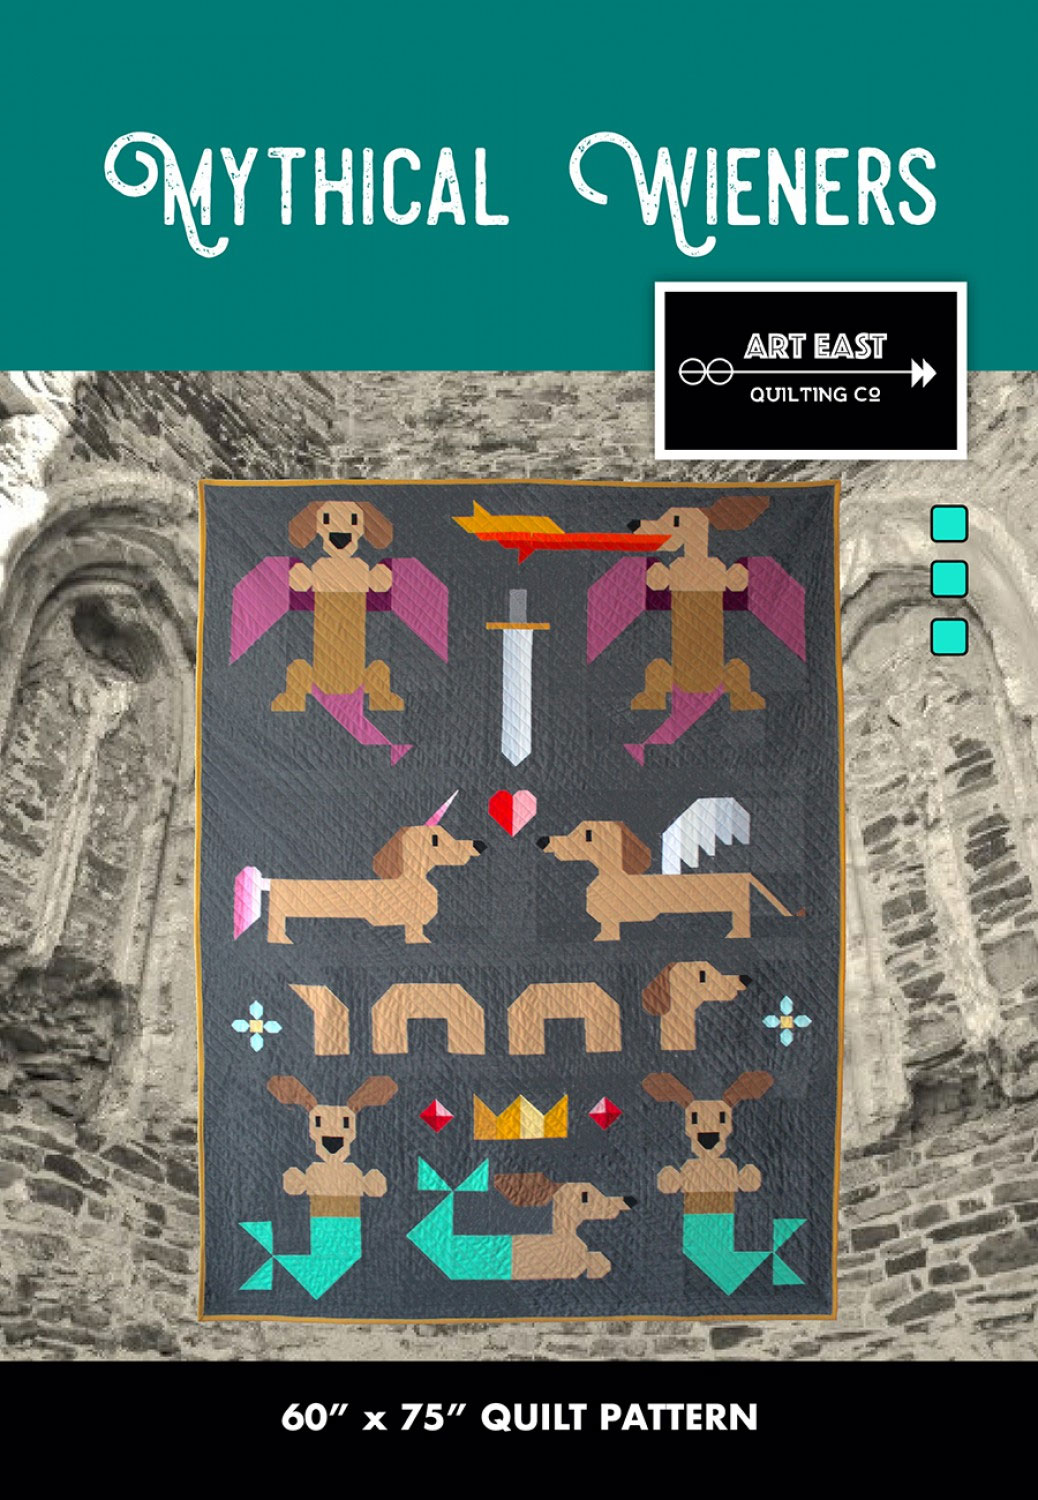 Mythical-Wieners-quilt-sewing-pattern-Art-East-Quilting-Co-front